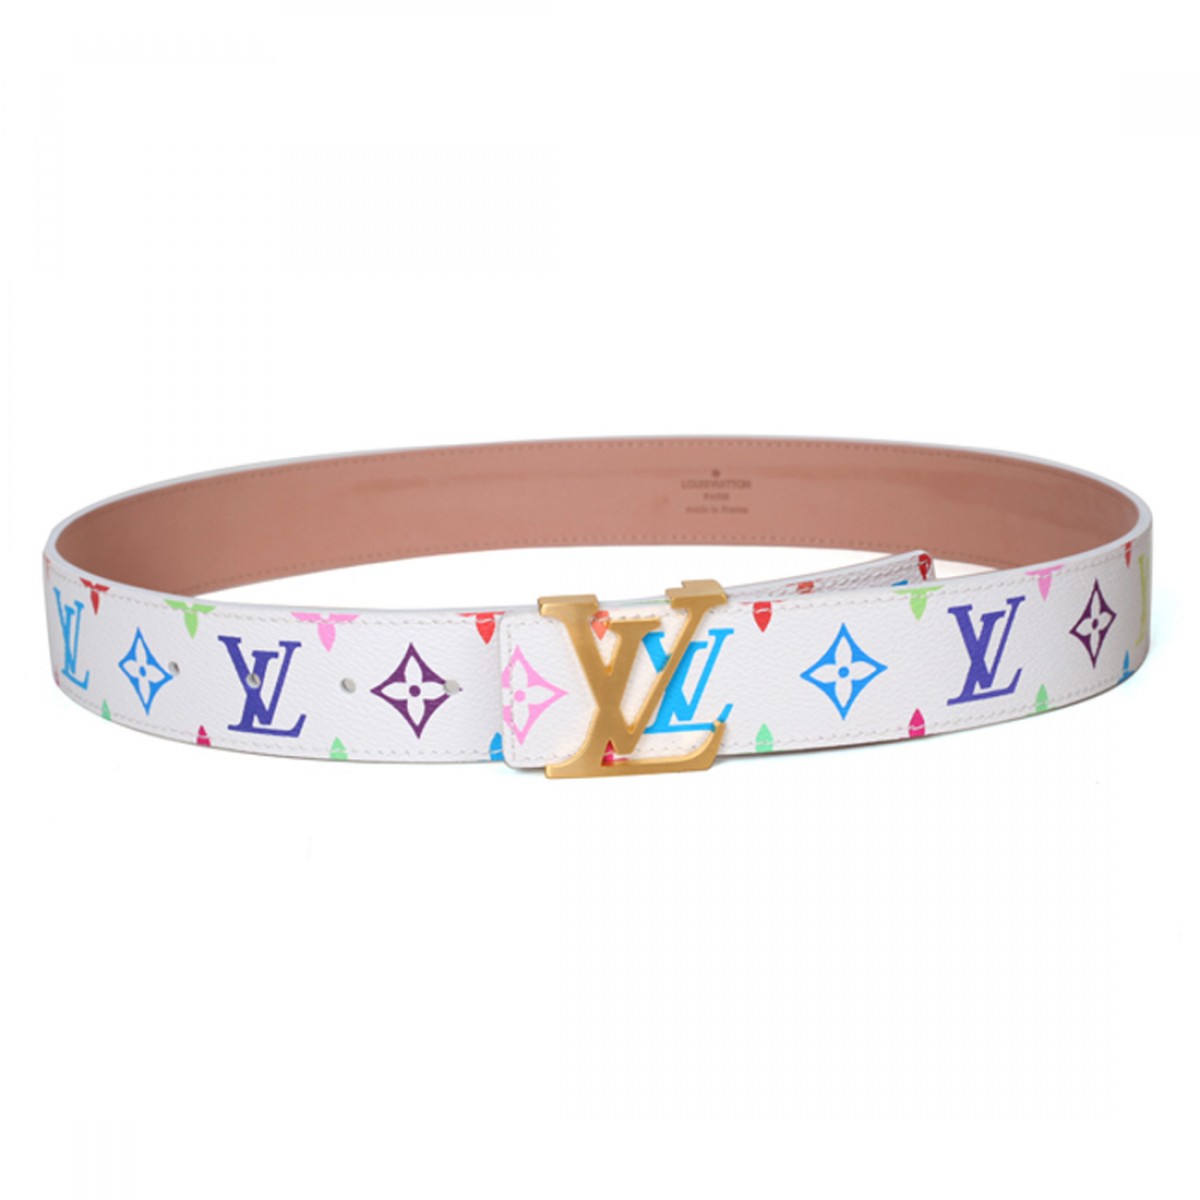 www.semadata.org | Louis Vuitton Ladies Belt, France Online shop in Bangladesh with full of ...